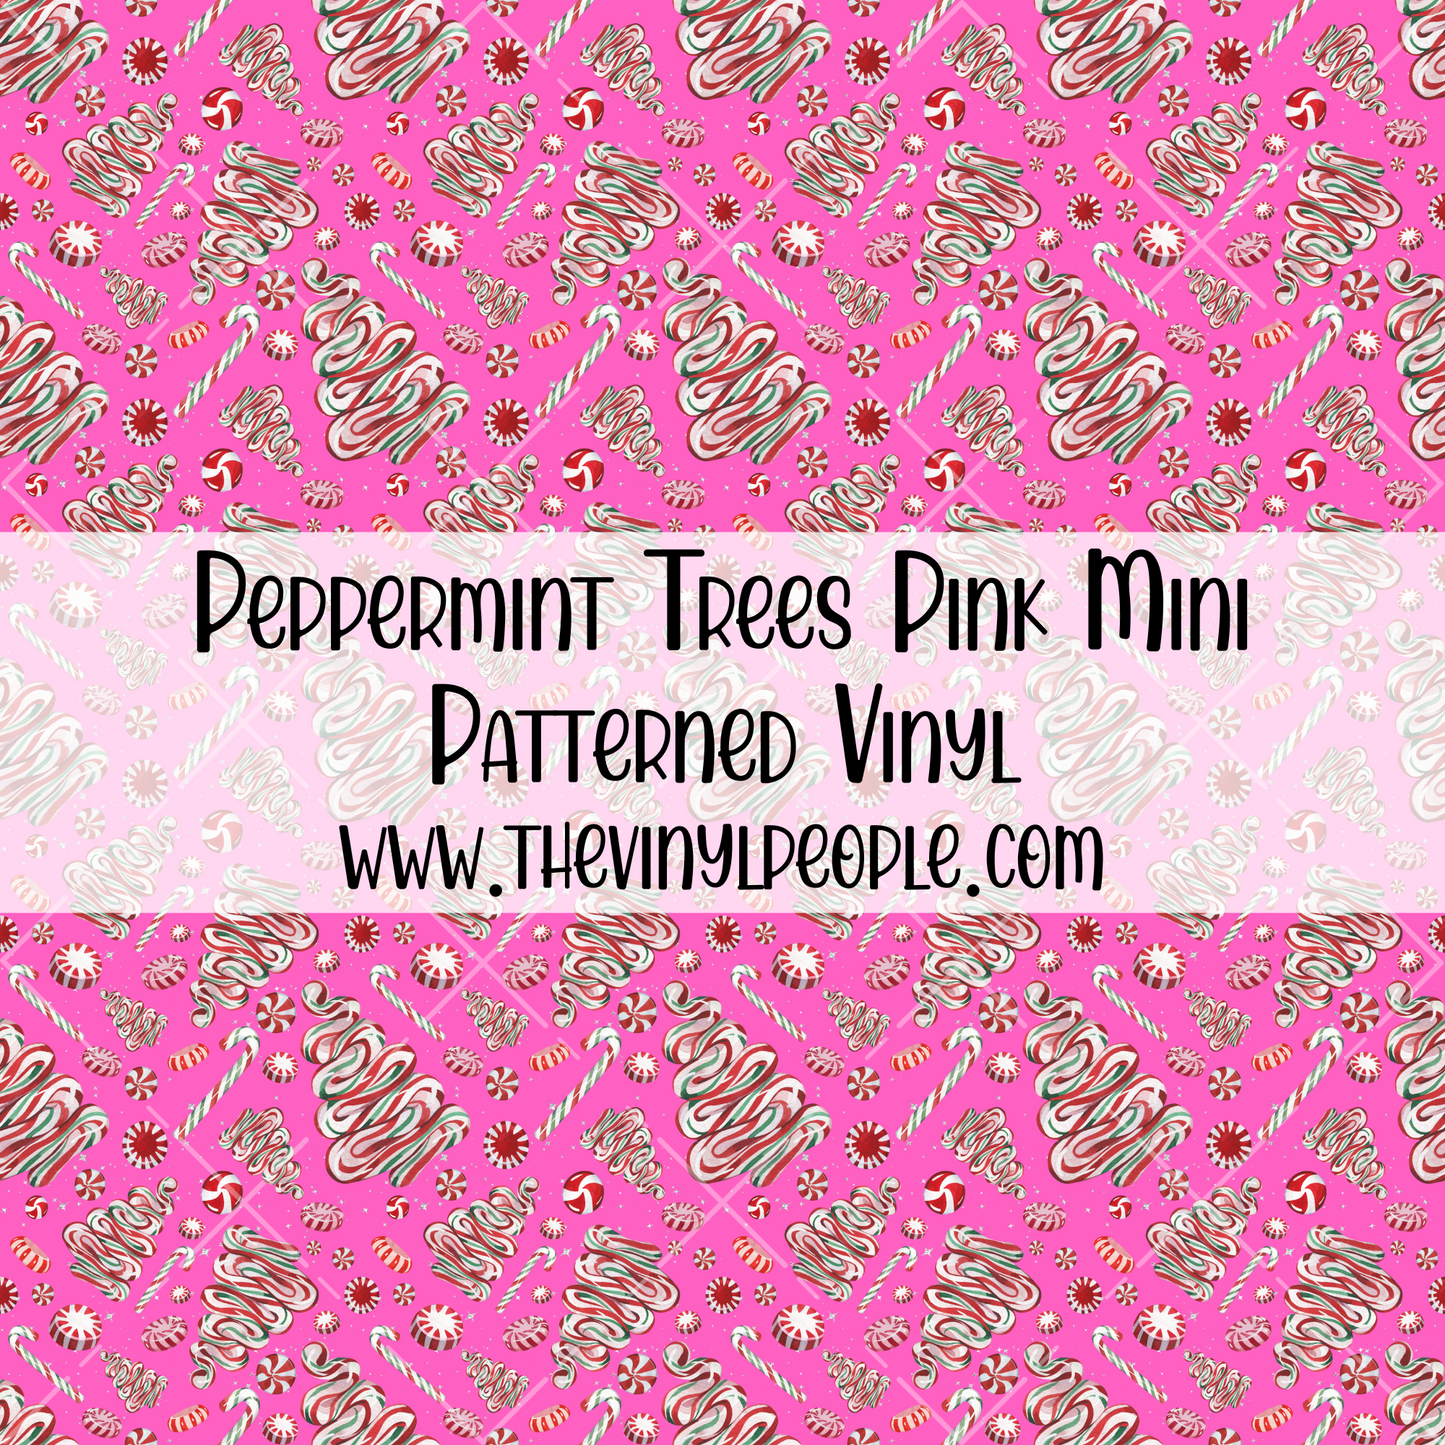 Peppermint Trees Pink Patterned Vinyl